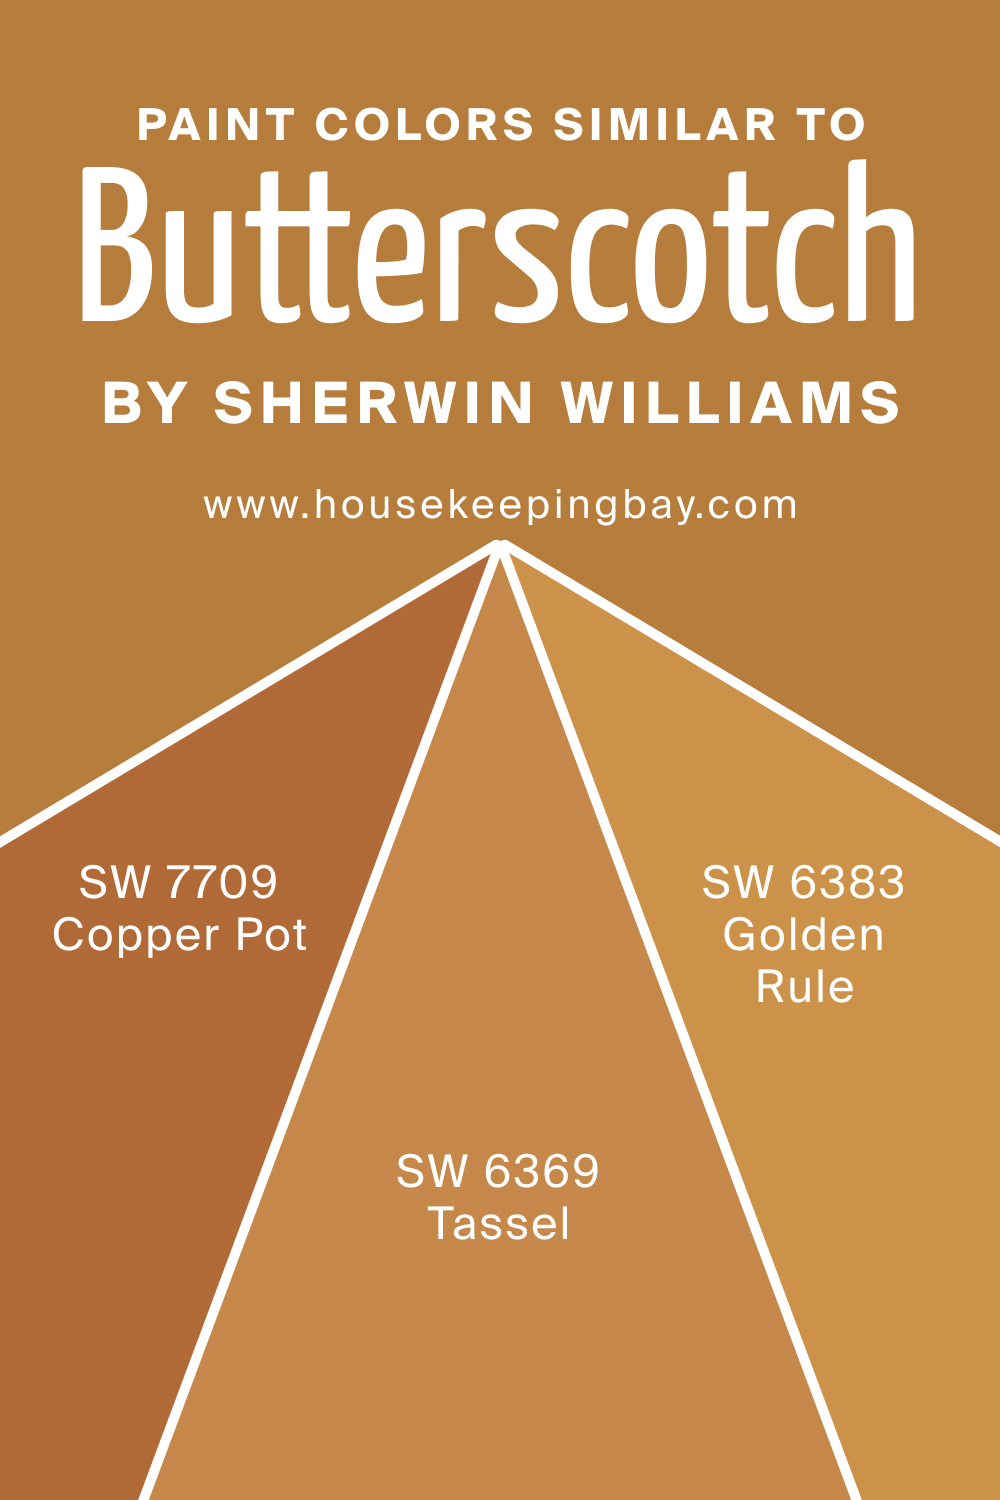 Paint Color Similar to SW 6377 Butterscotch by Sherwin Williams